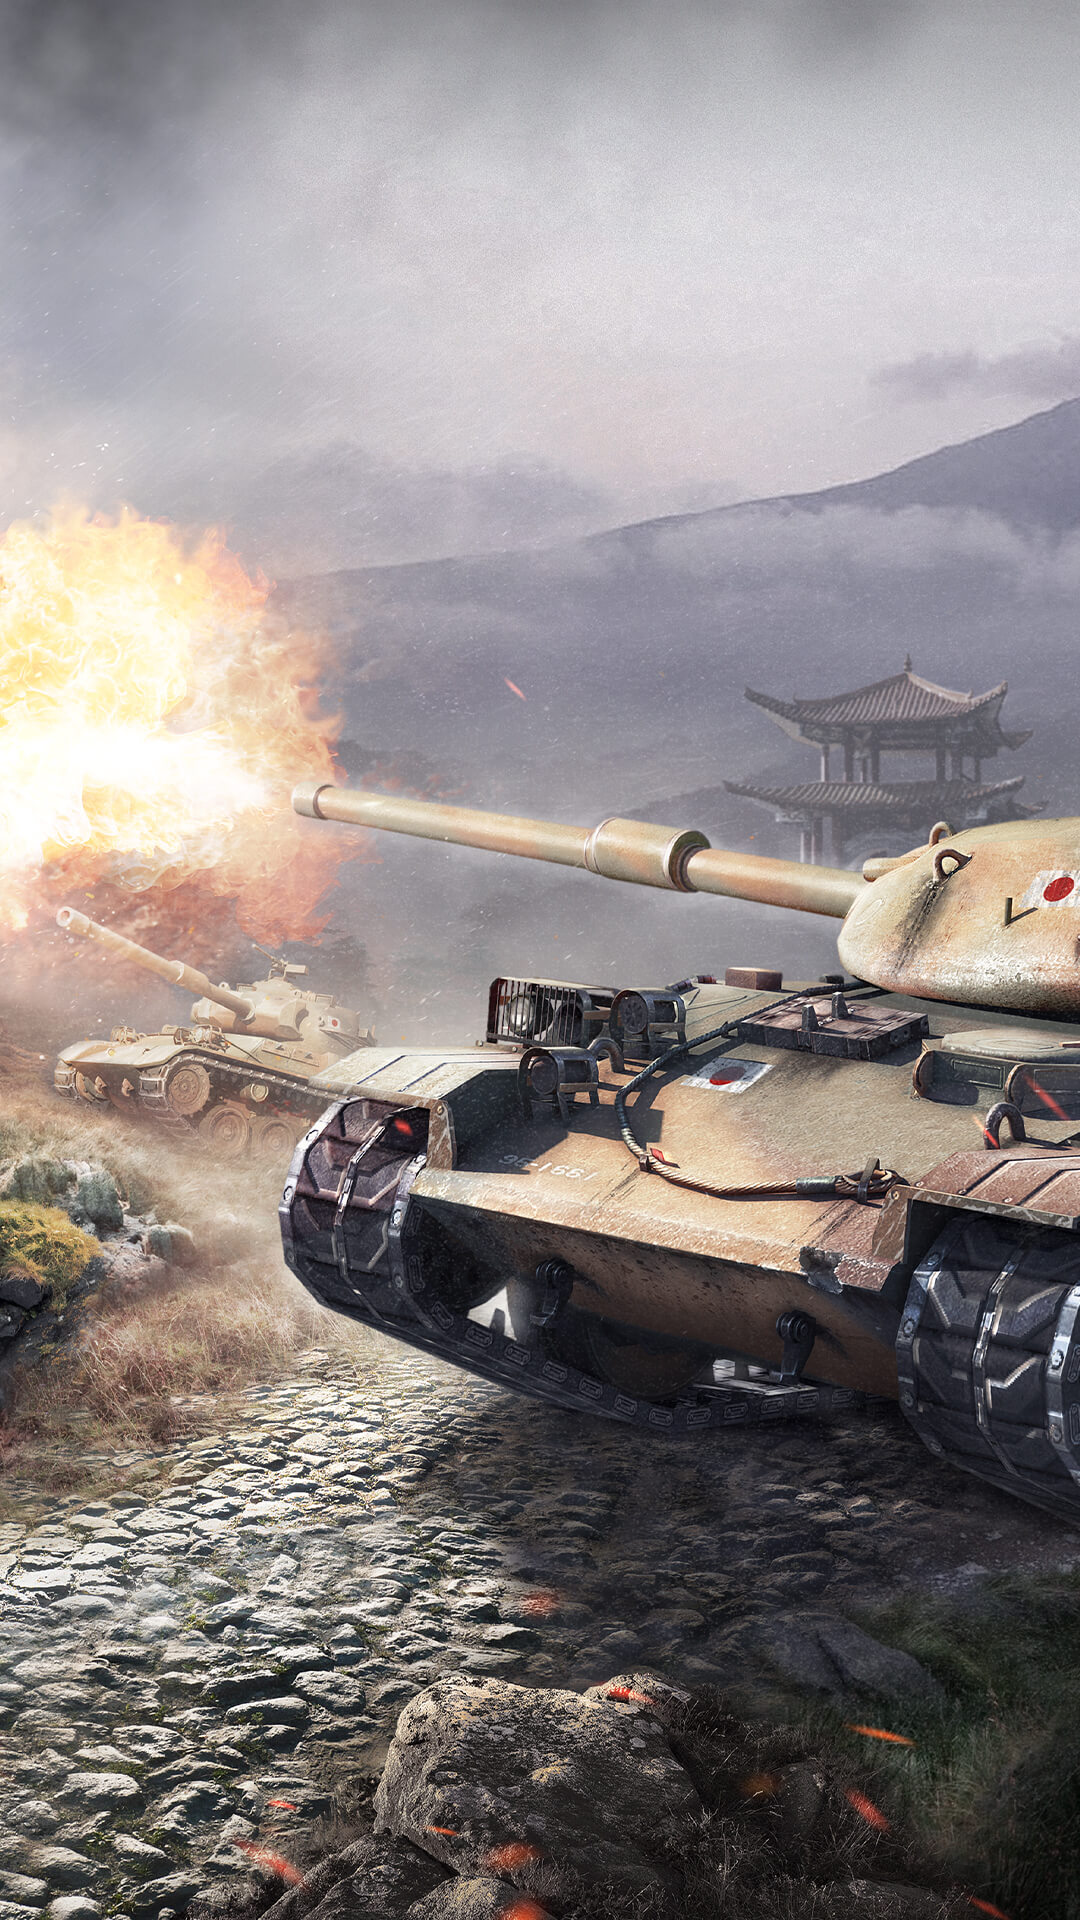 More Updated Wallpaper. General News. World of Tanks